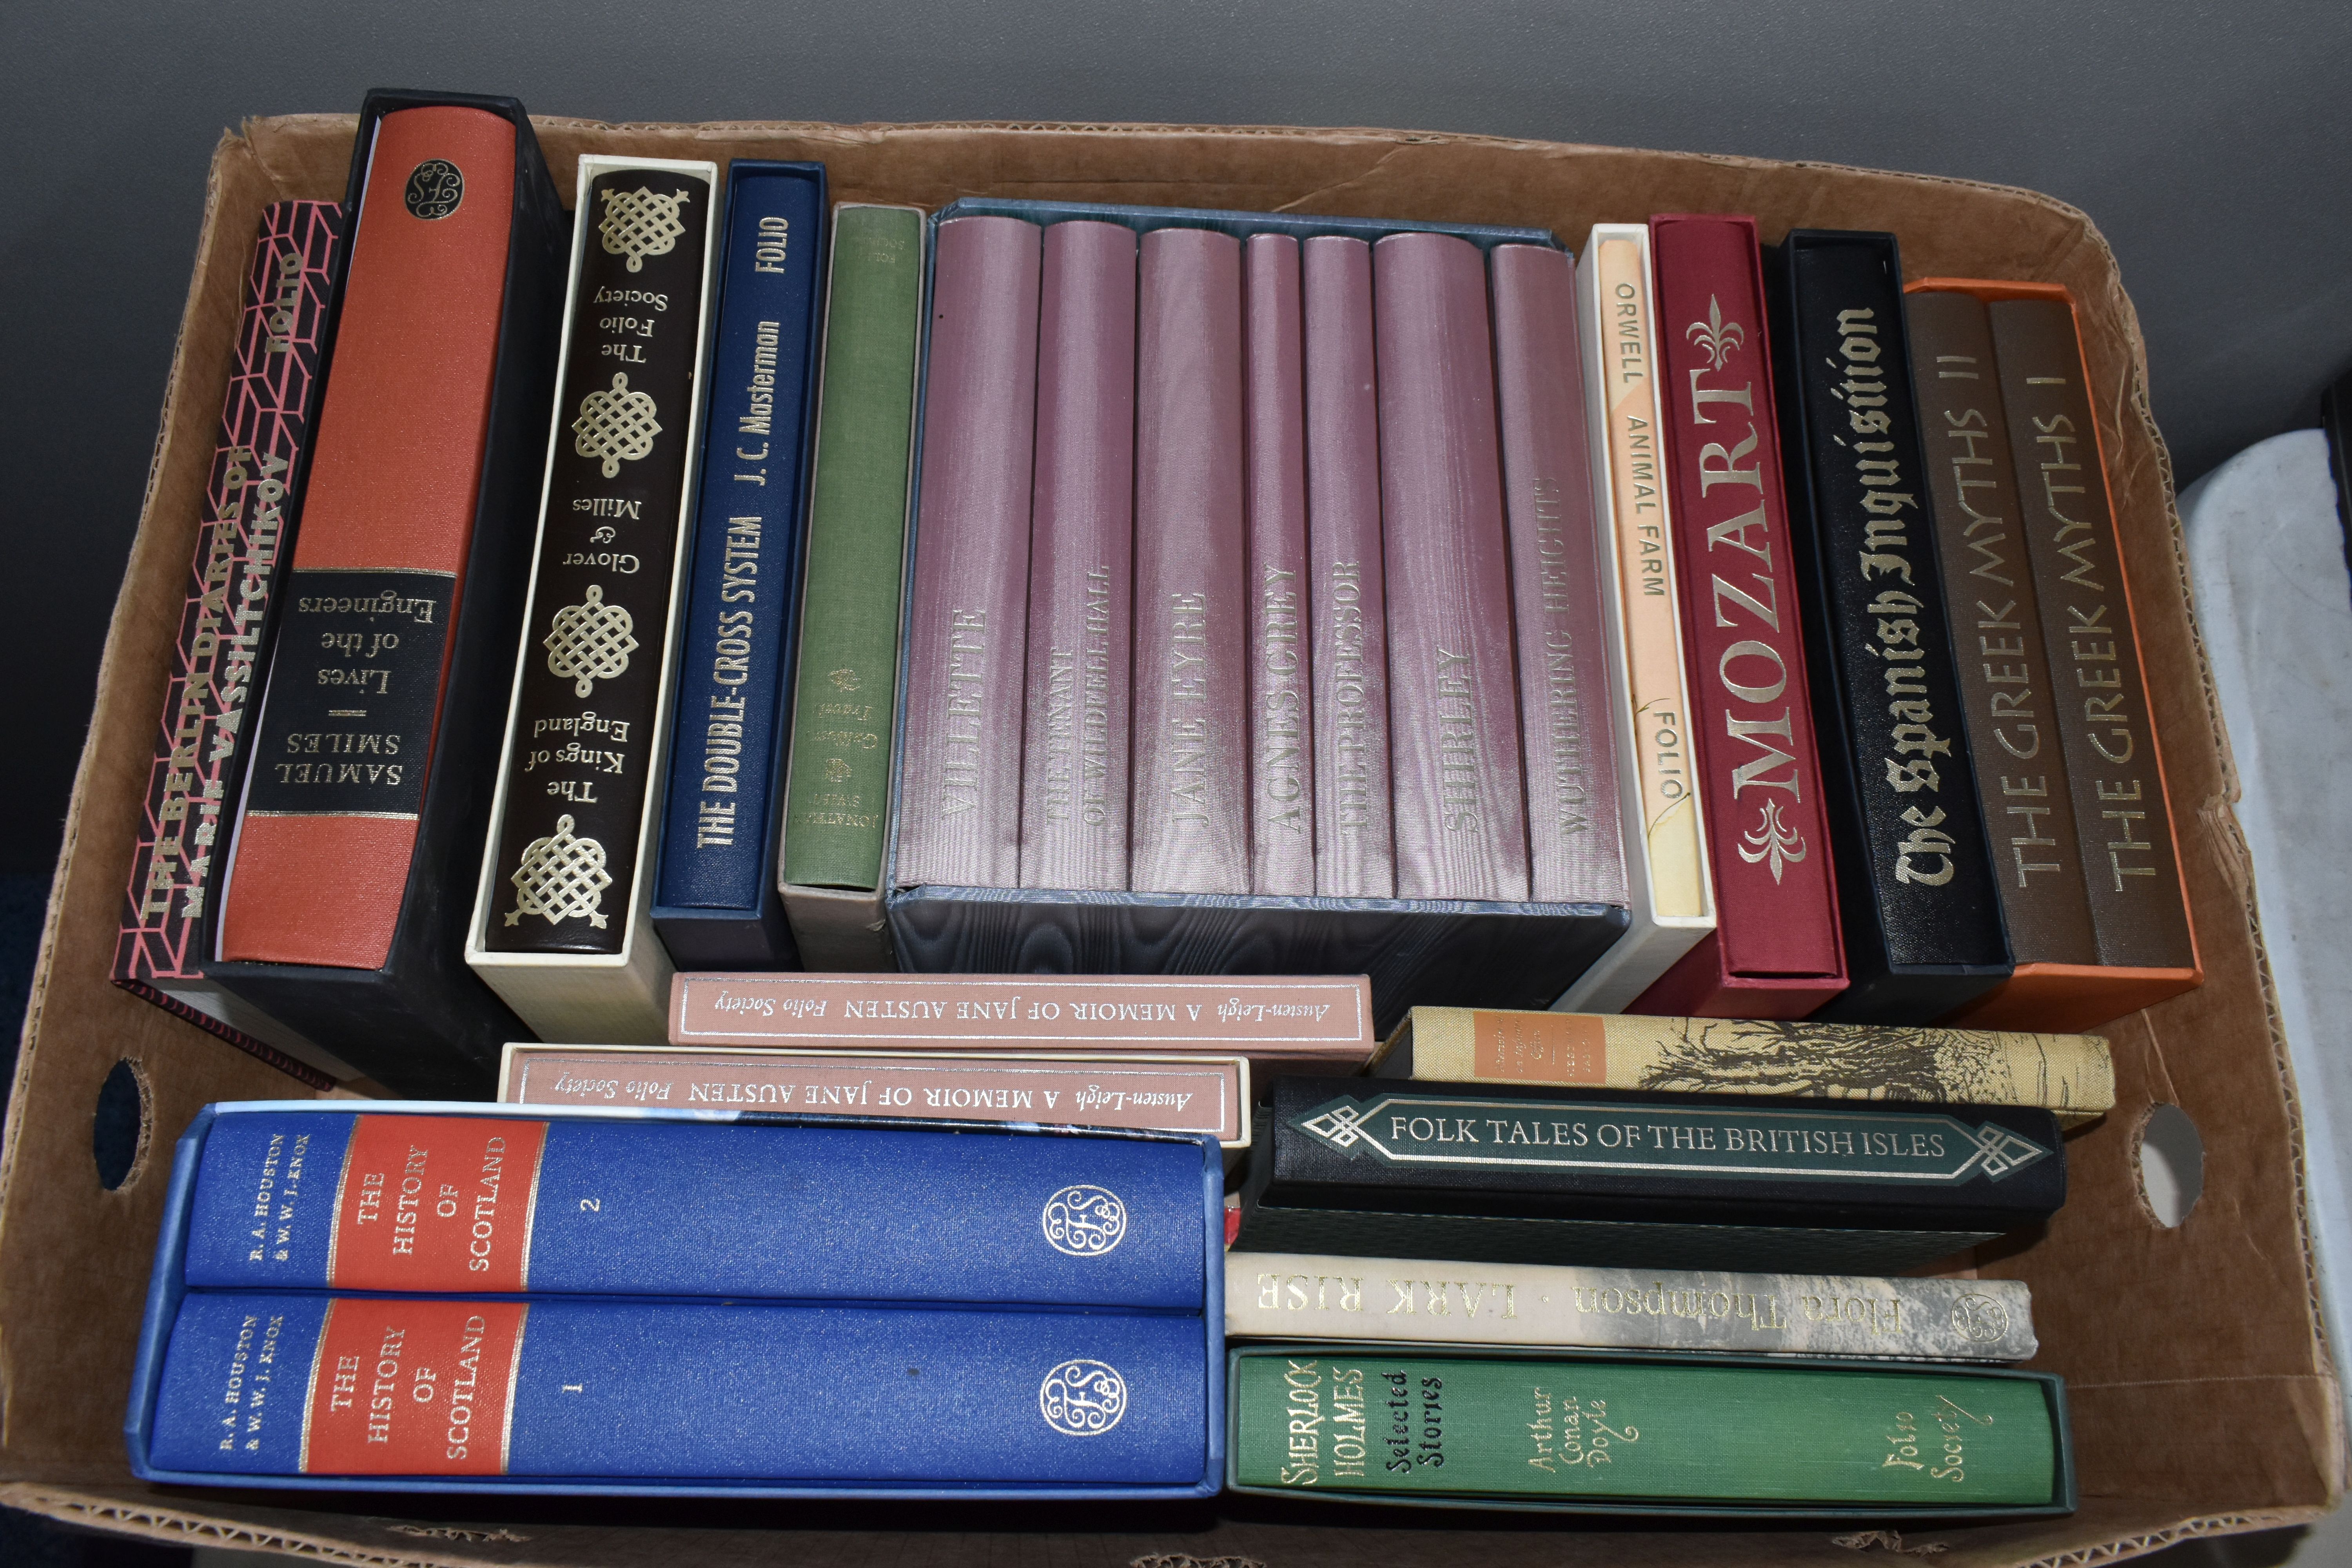 ONE BOX OF TWENTY-FIVE FOLIO SOCIETY BOOKS, comprising two volumes of The Greek Myths by Robert